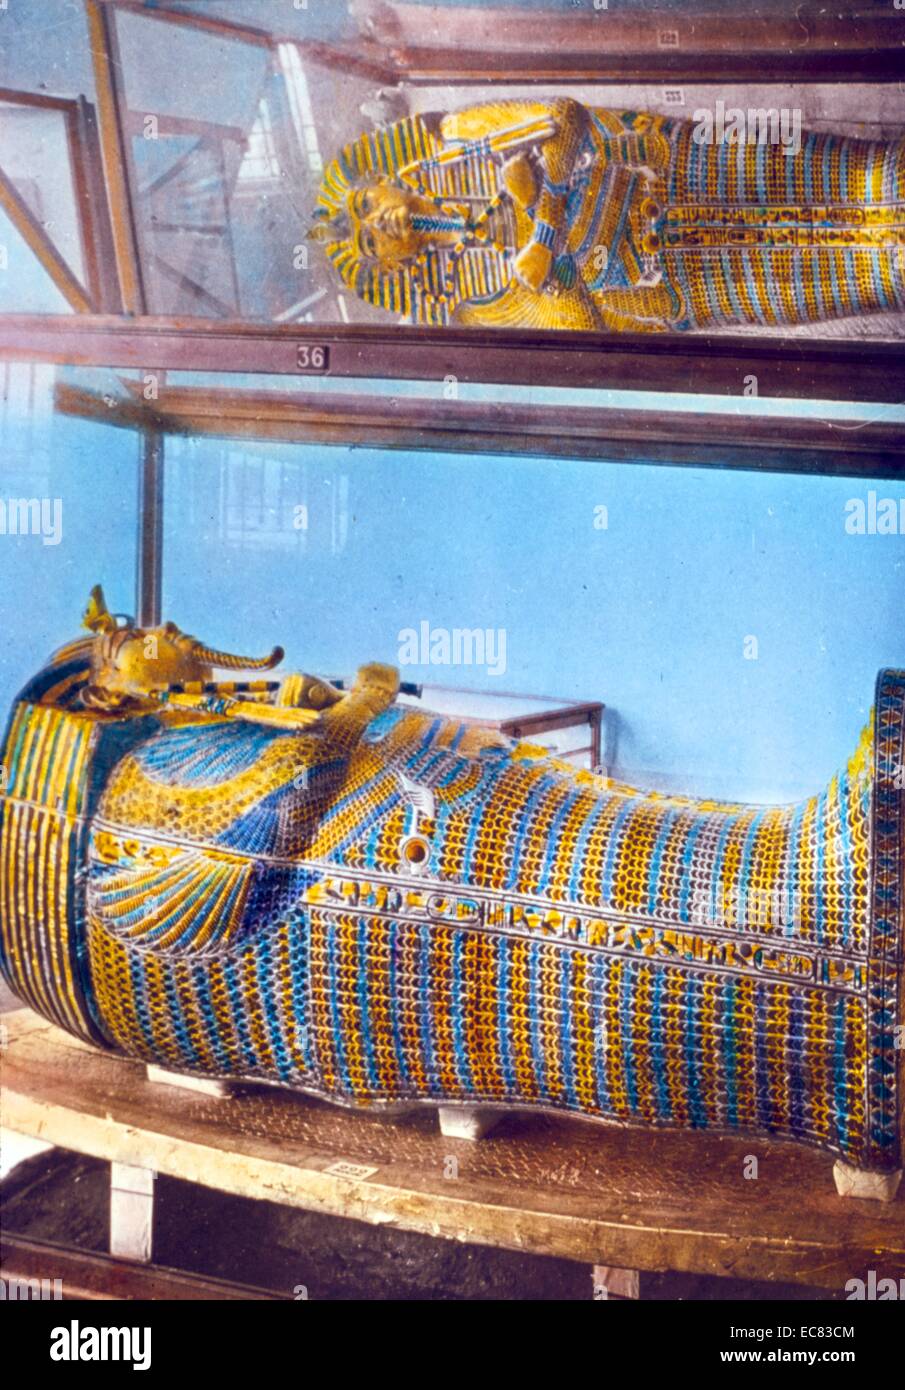 Colour photograph of the gold coffin of Tutankhamen; Egyptian pharaoh of the 18th Dynasty. Dated 1930 Stock Photo